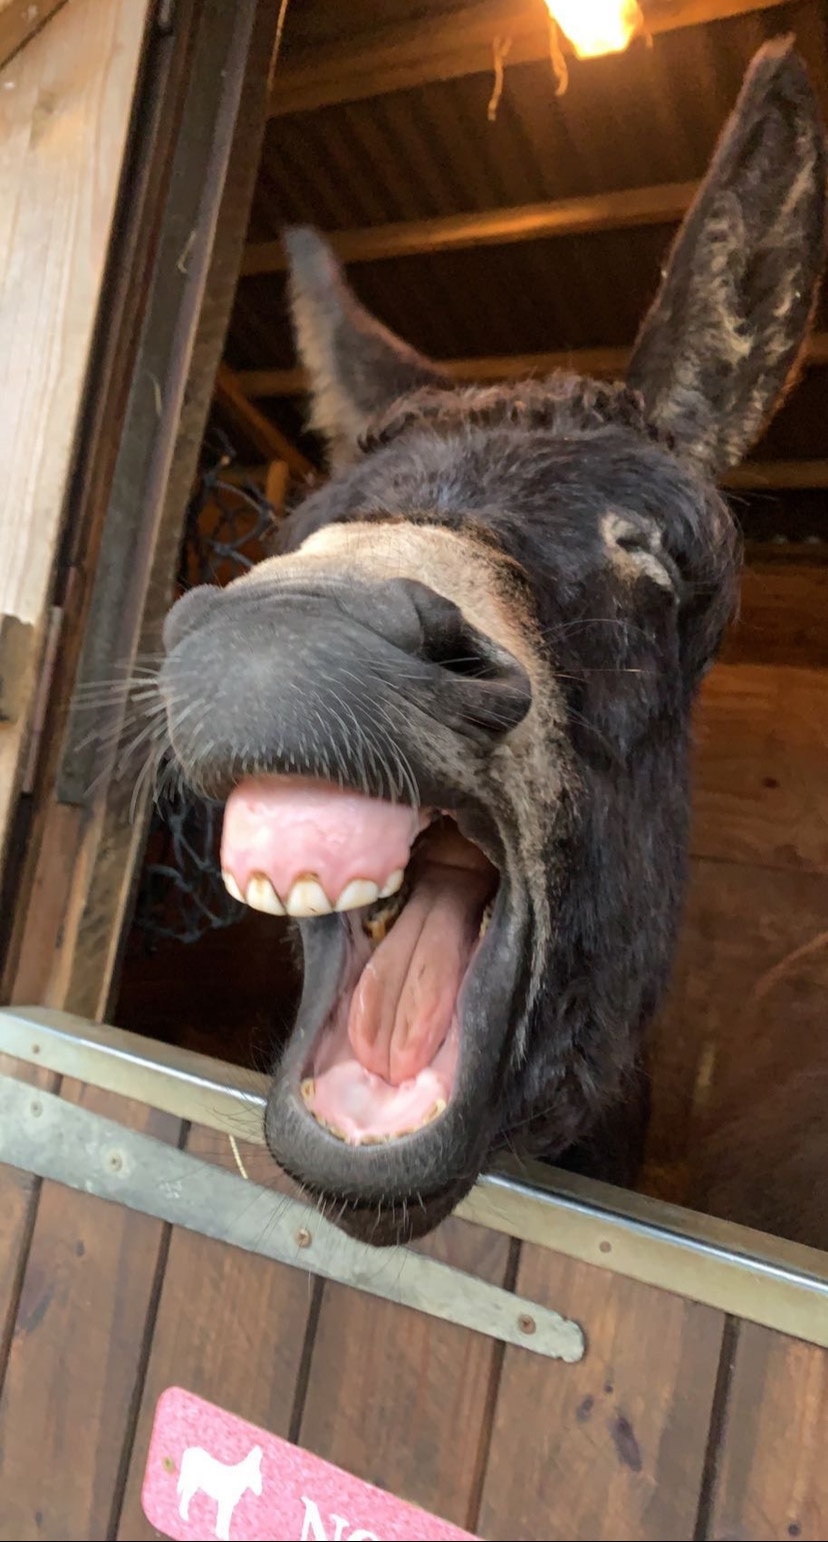 A donkey with their mouth wide open